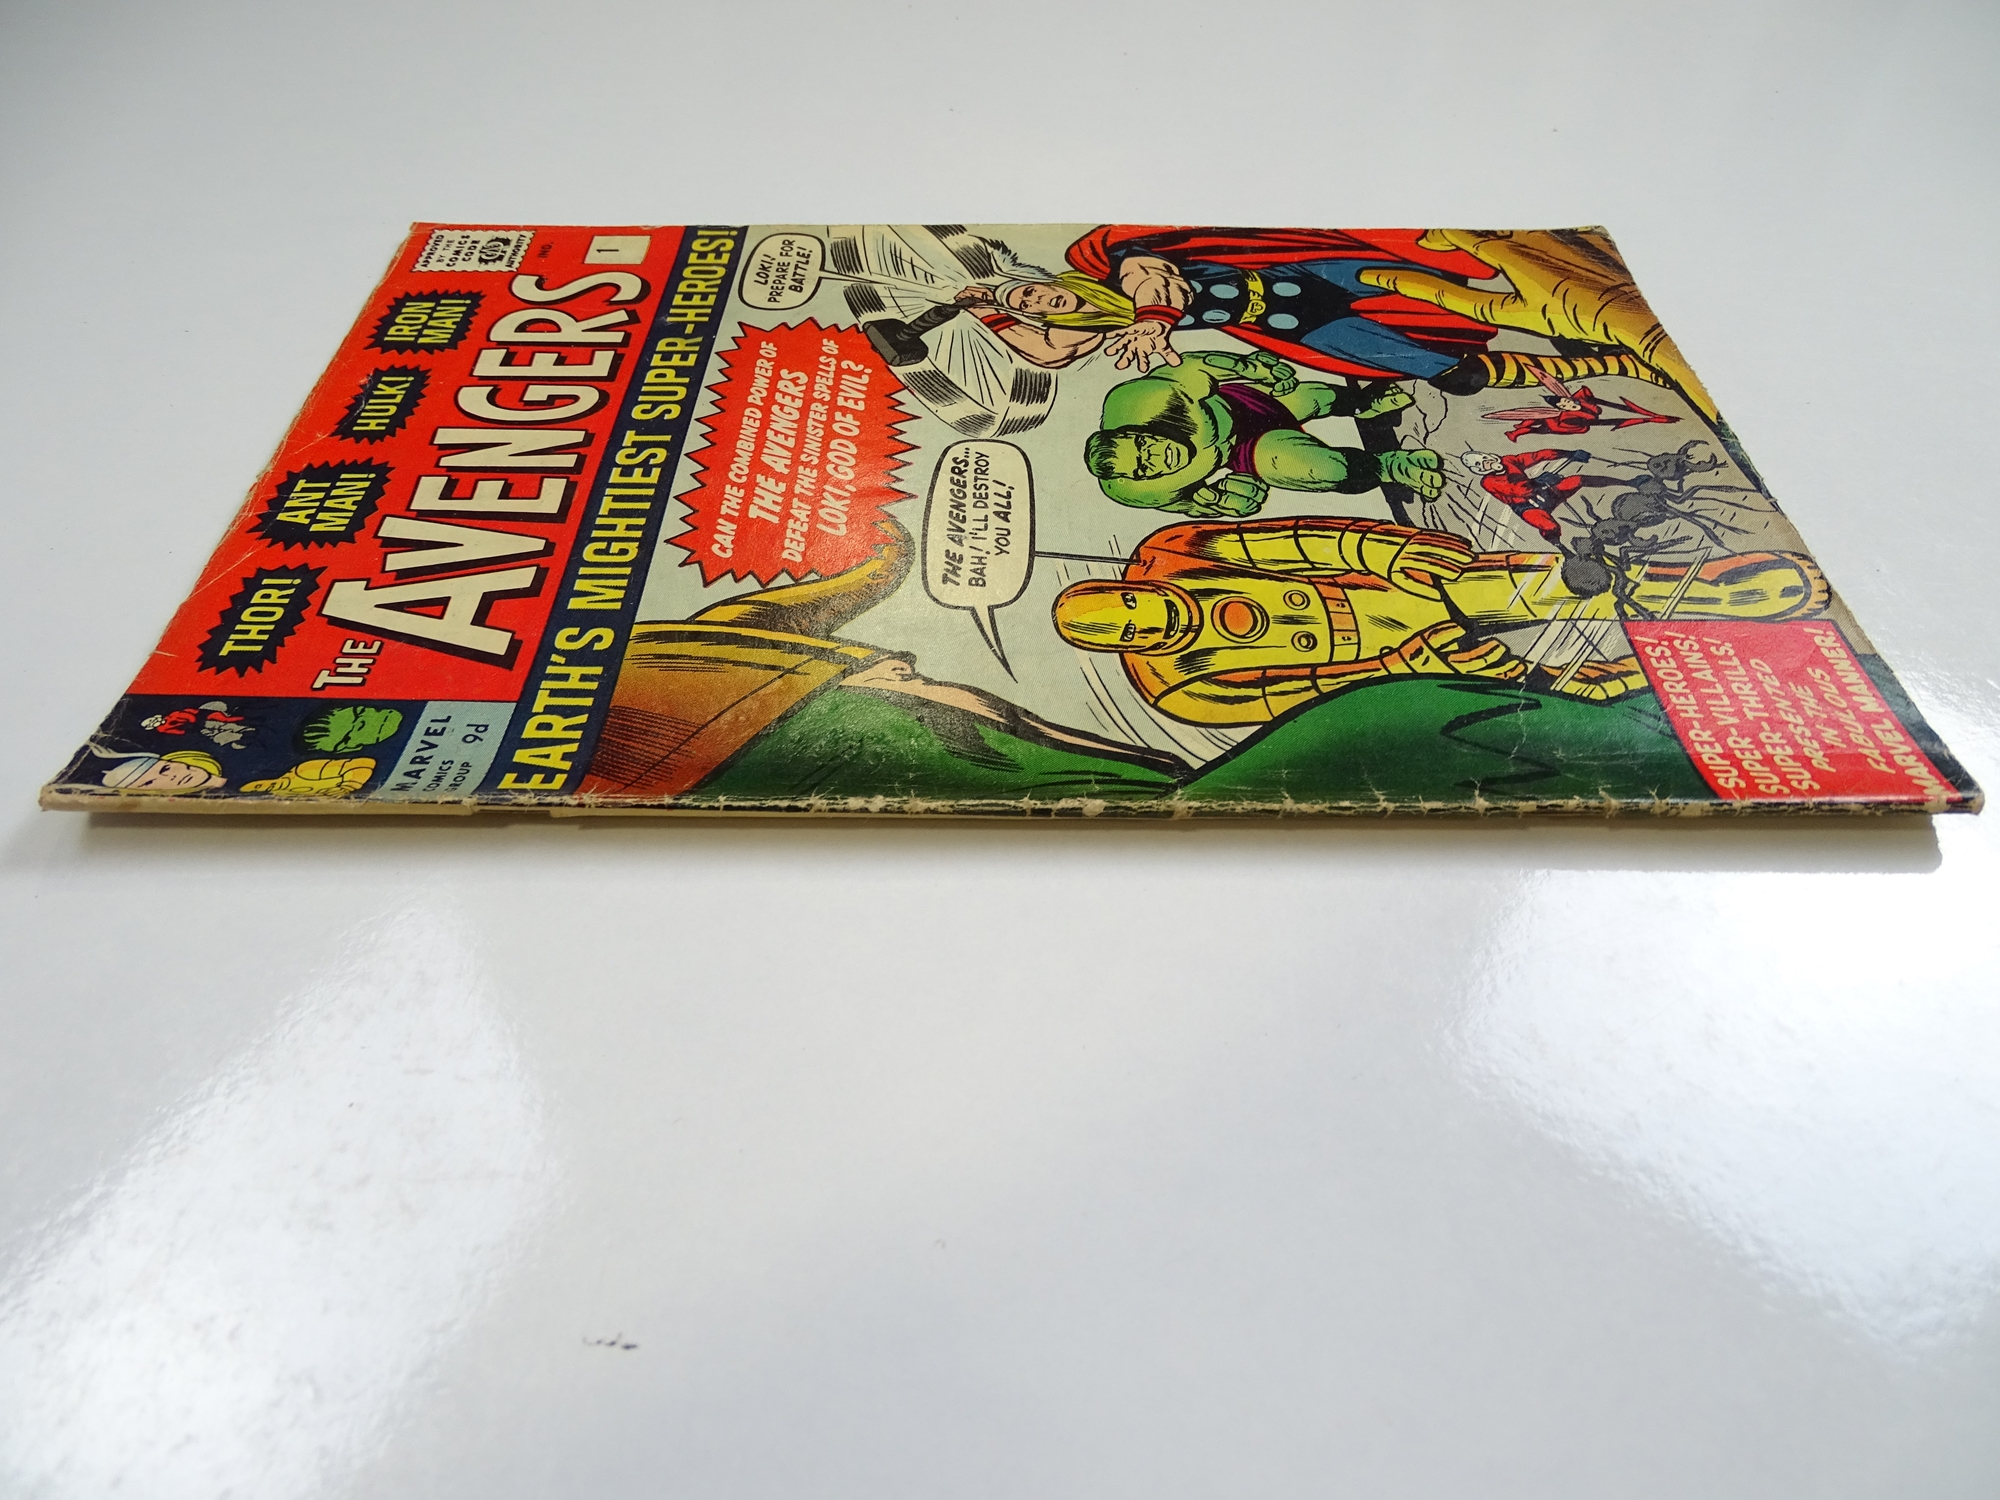 AVENGERS #1 - (1963 - MARVEL - UK Price Variant) - First appearance of the Avengers with original - Image 6 of 6